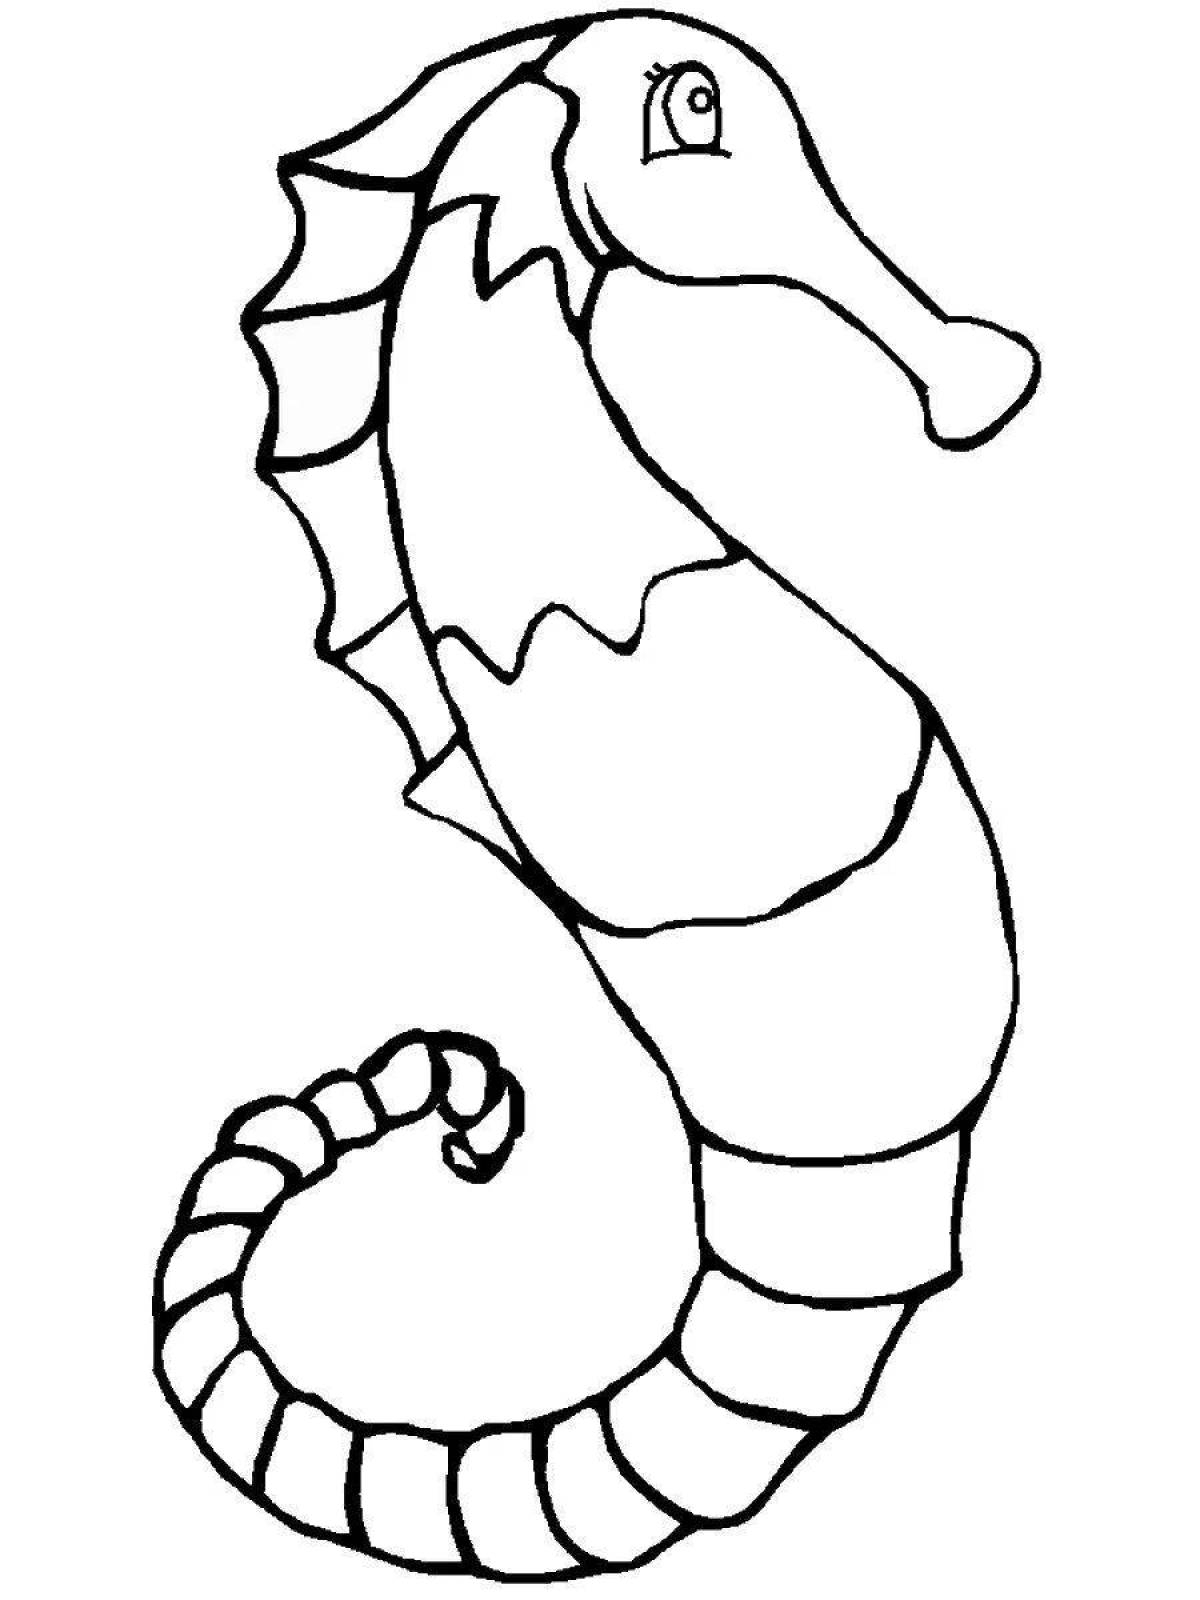 Playful seahorse coloring page for kids